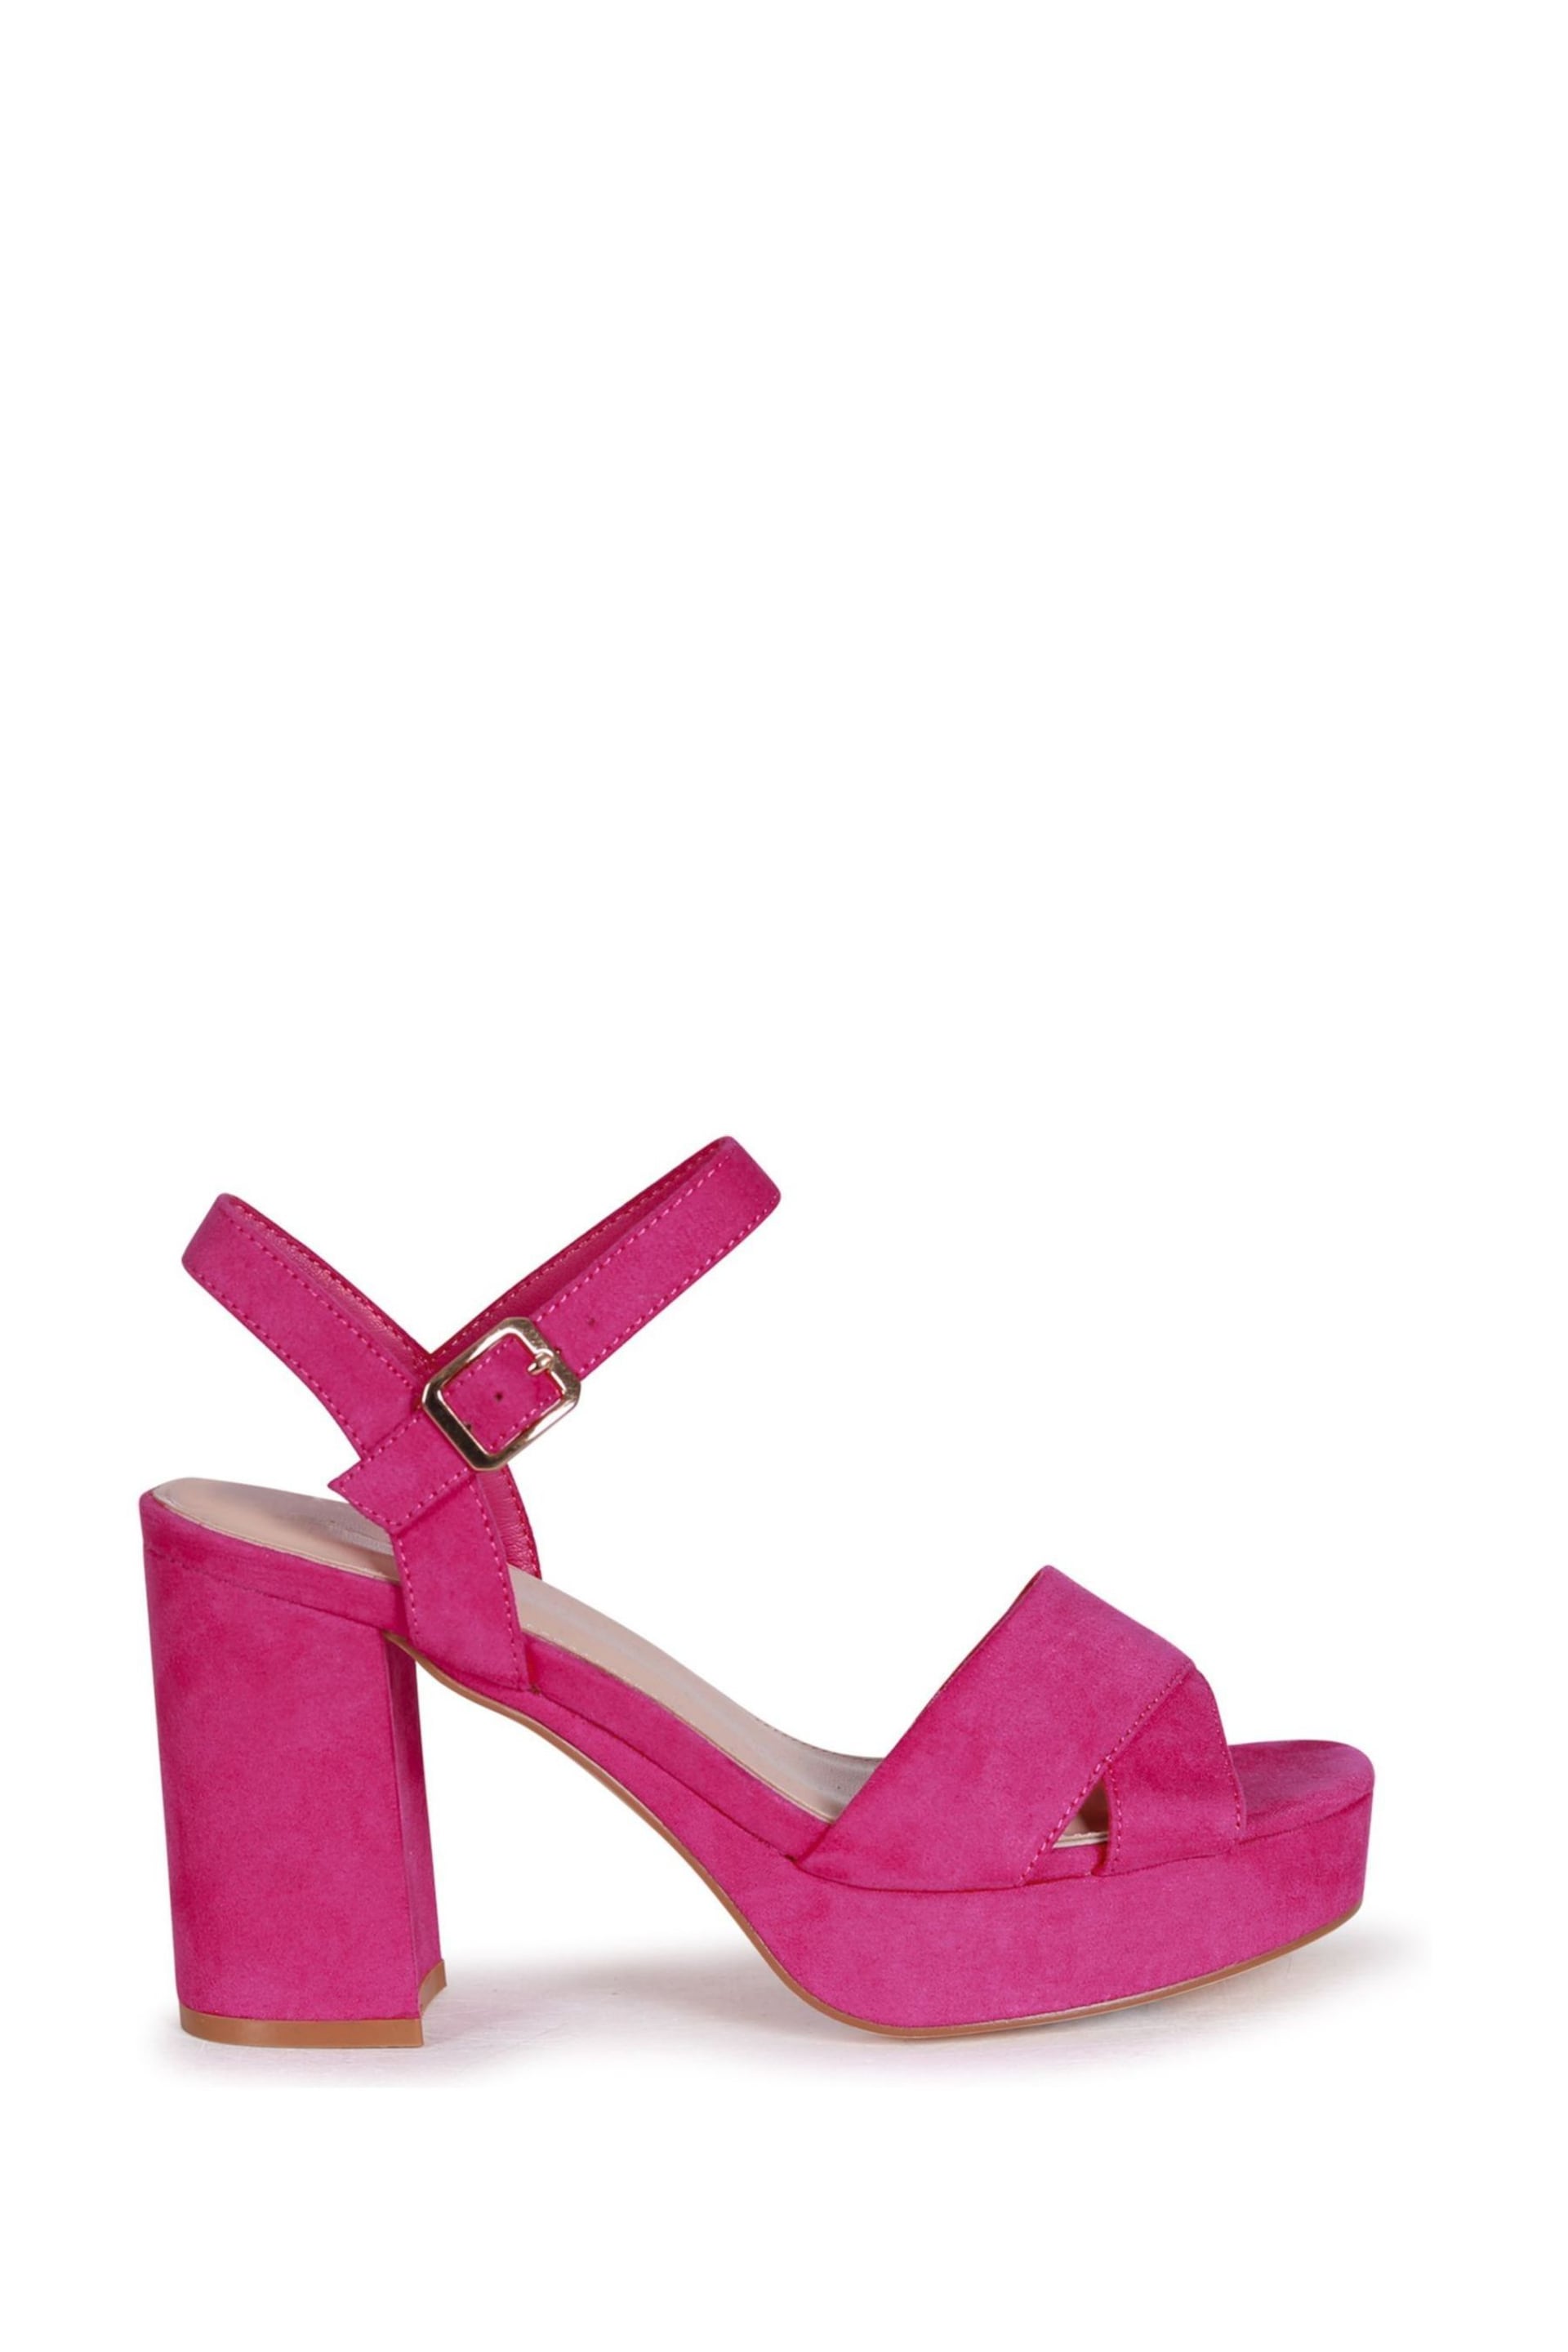 Linzi Pink Fuchsia Faux Suede Verony Strappy Studded Block Heeled Sandal - Image 2 of 4